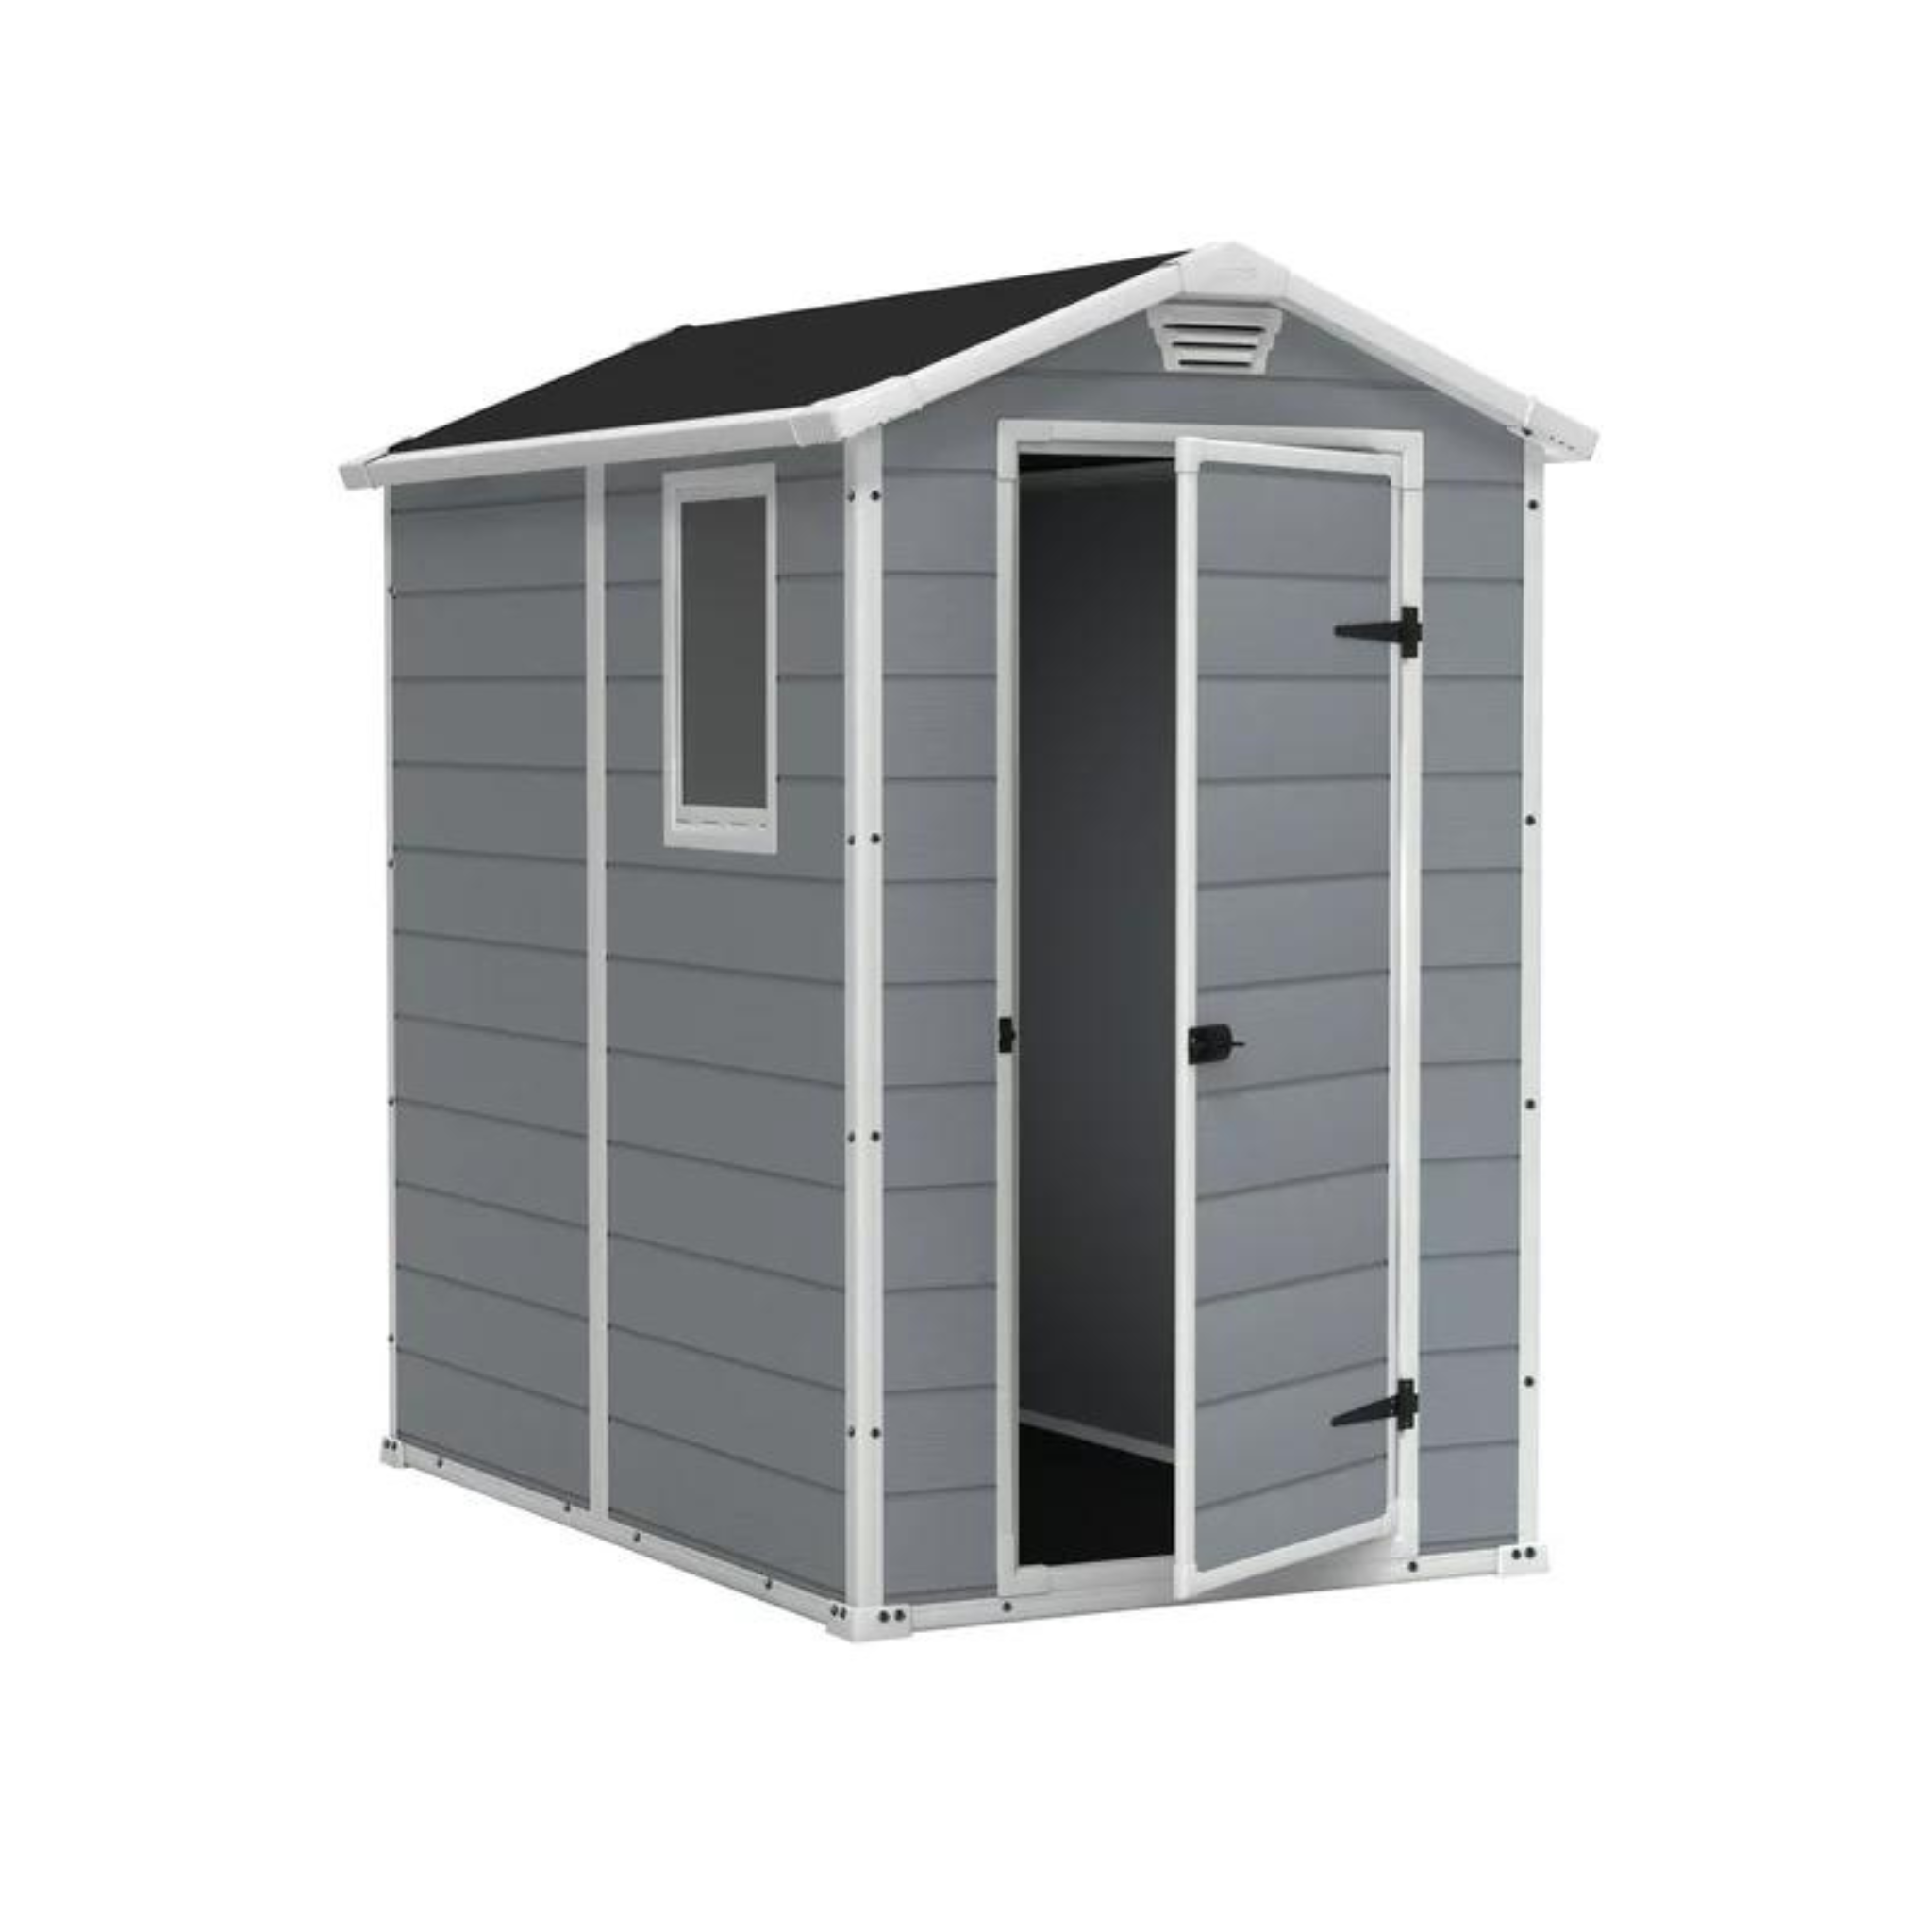 4' x 6' Keter Manor Resin Storage Shed (Gray and White)